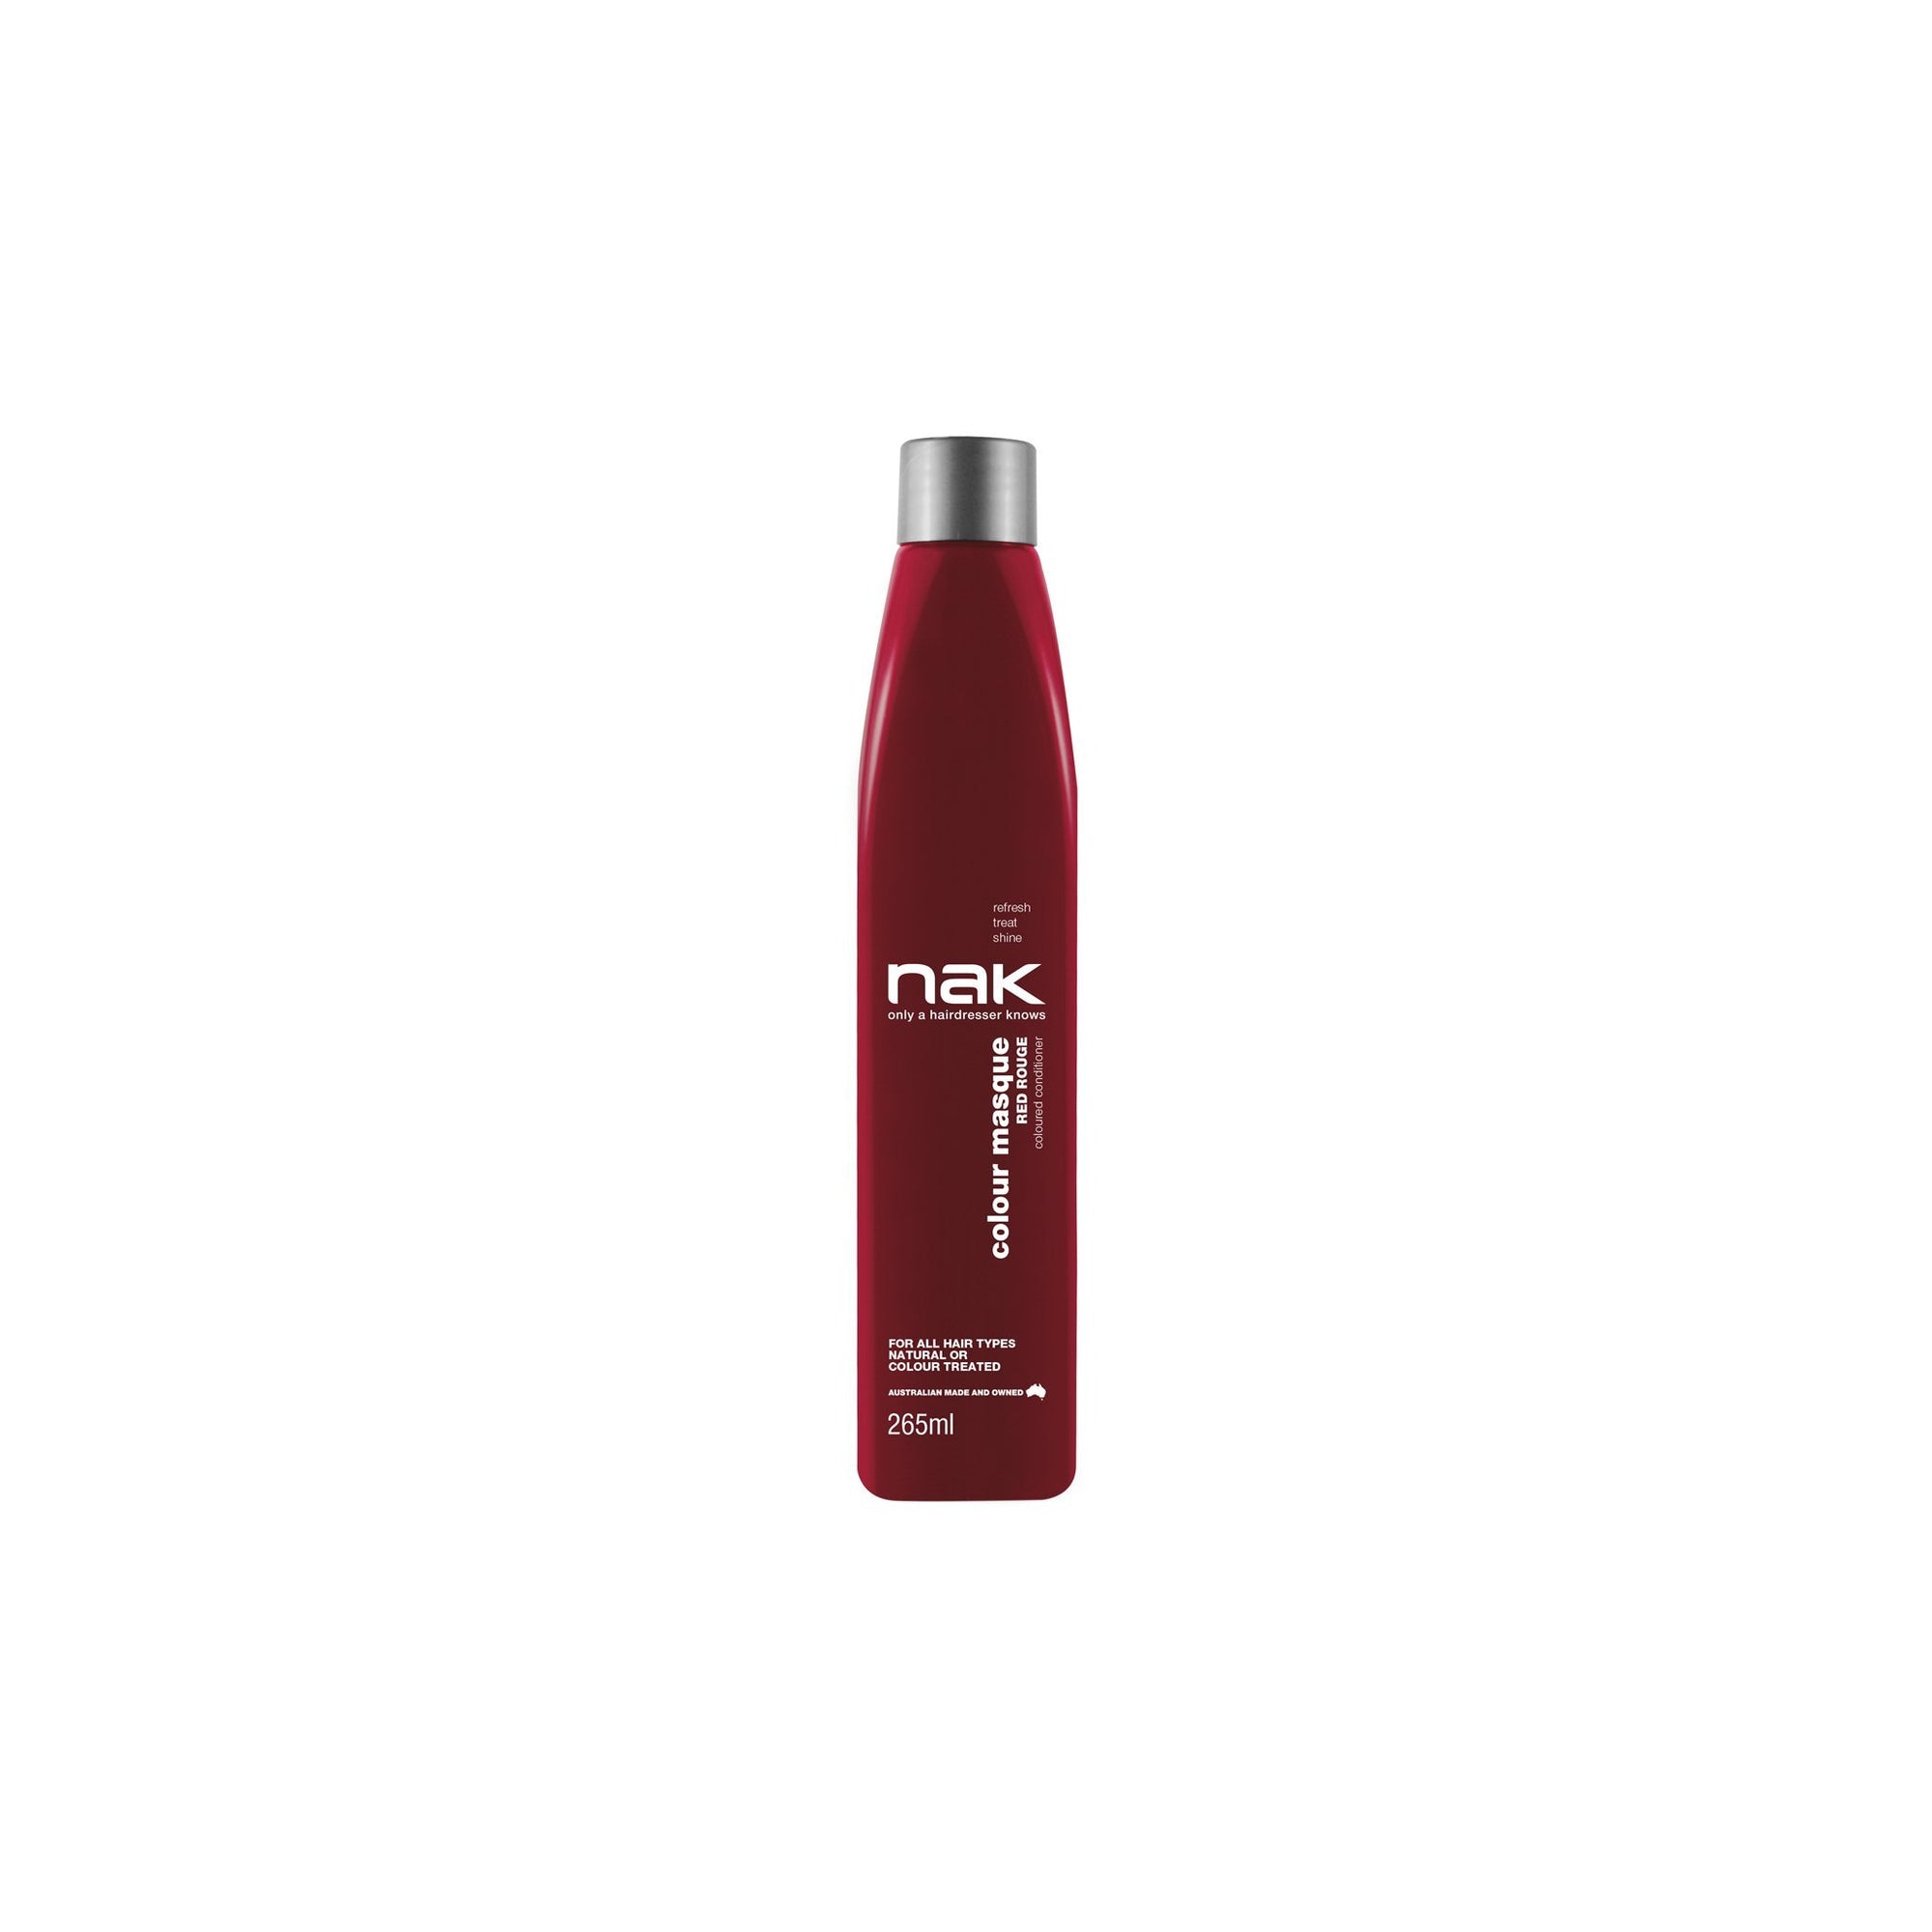 Nak Colour Masque Red Rogue Conditioner 265ml